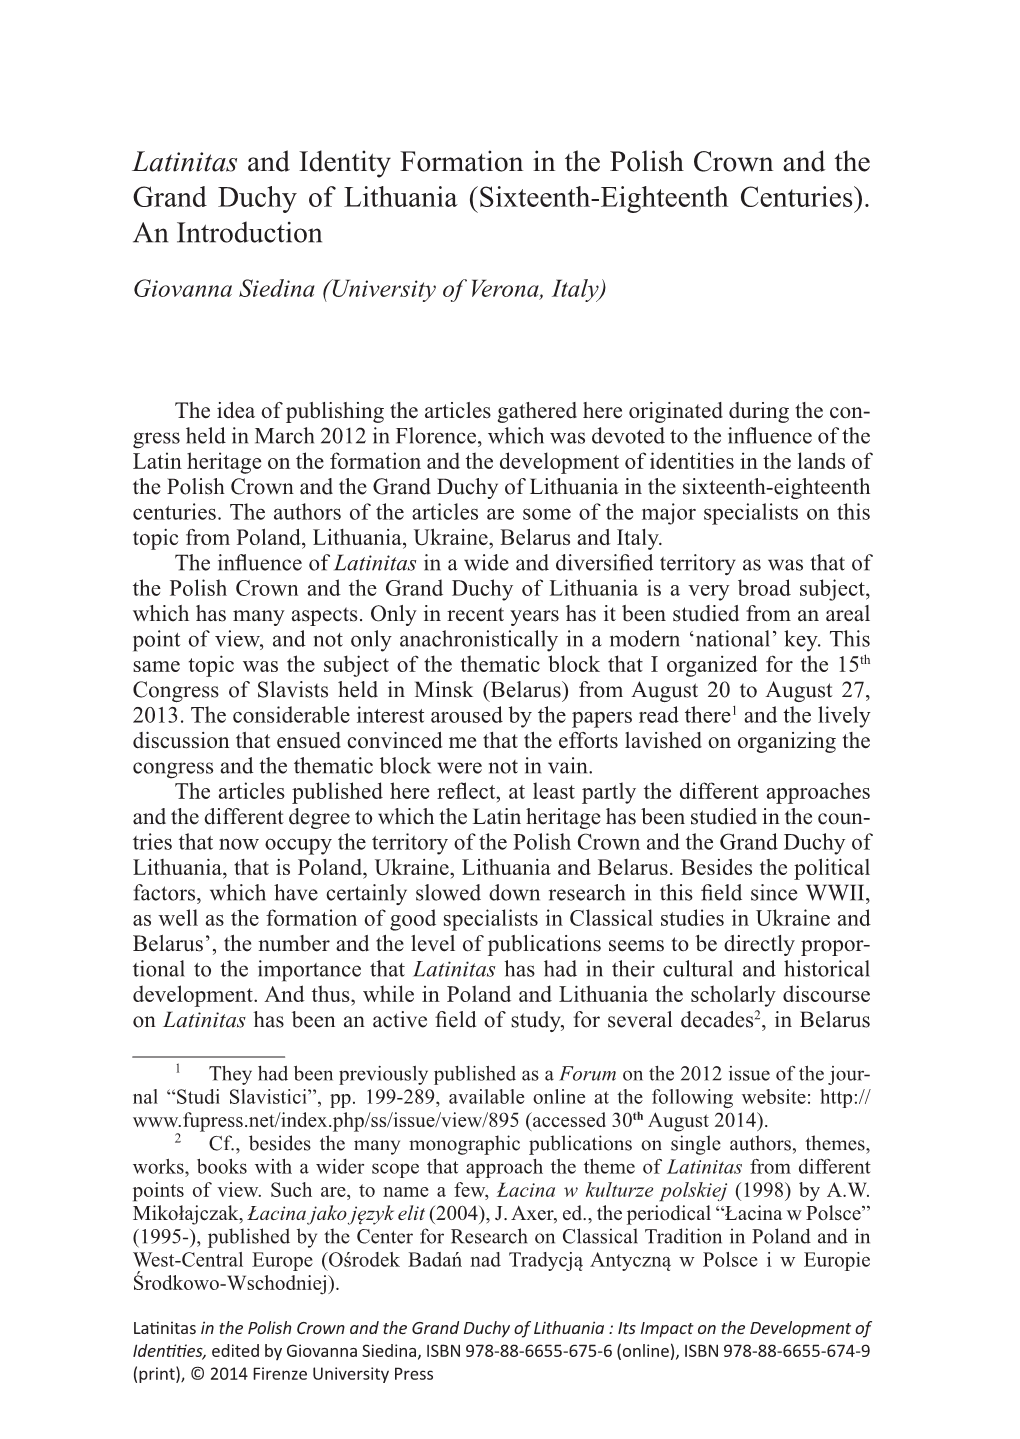 Latinitas and Identity Formation in the Polish Crown and the Grand Duchy of Lithuania (Sixteenth-Eighteenth Centuries)